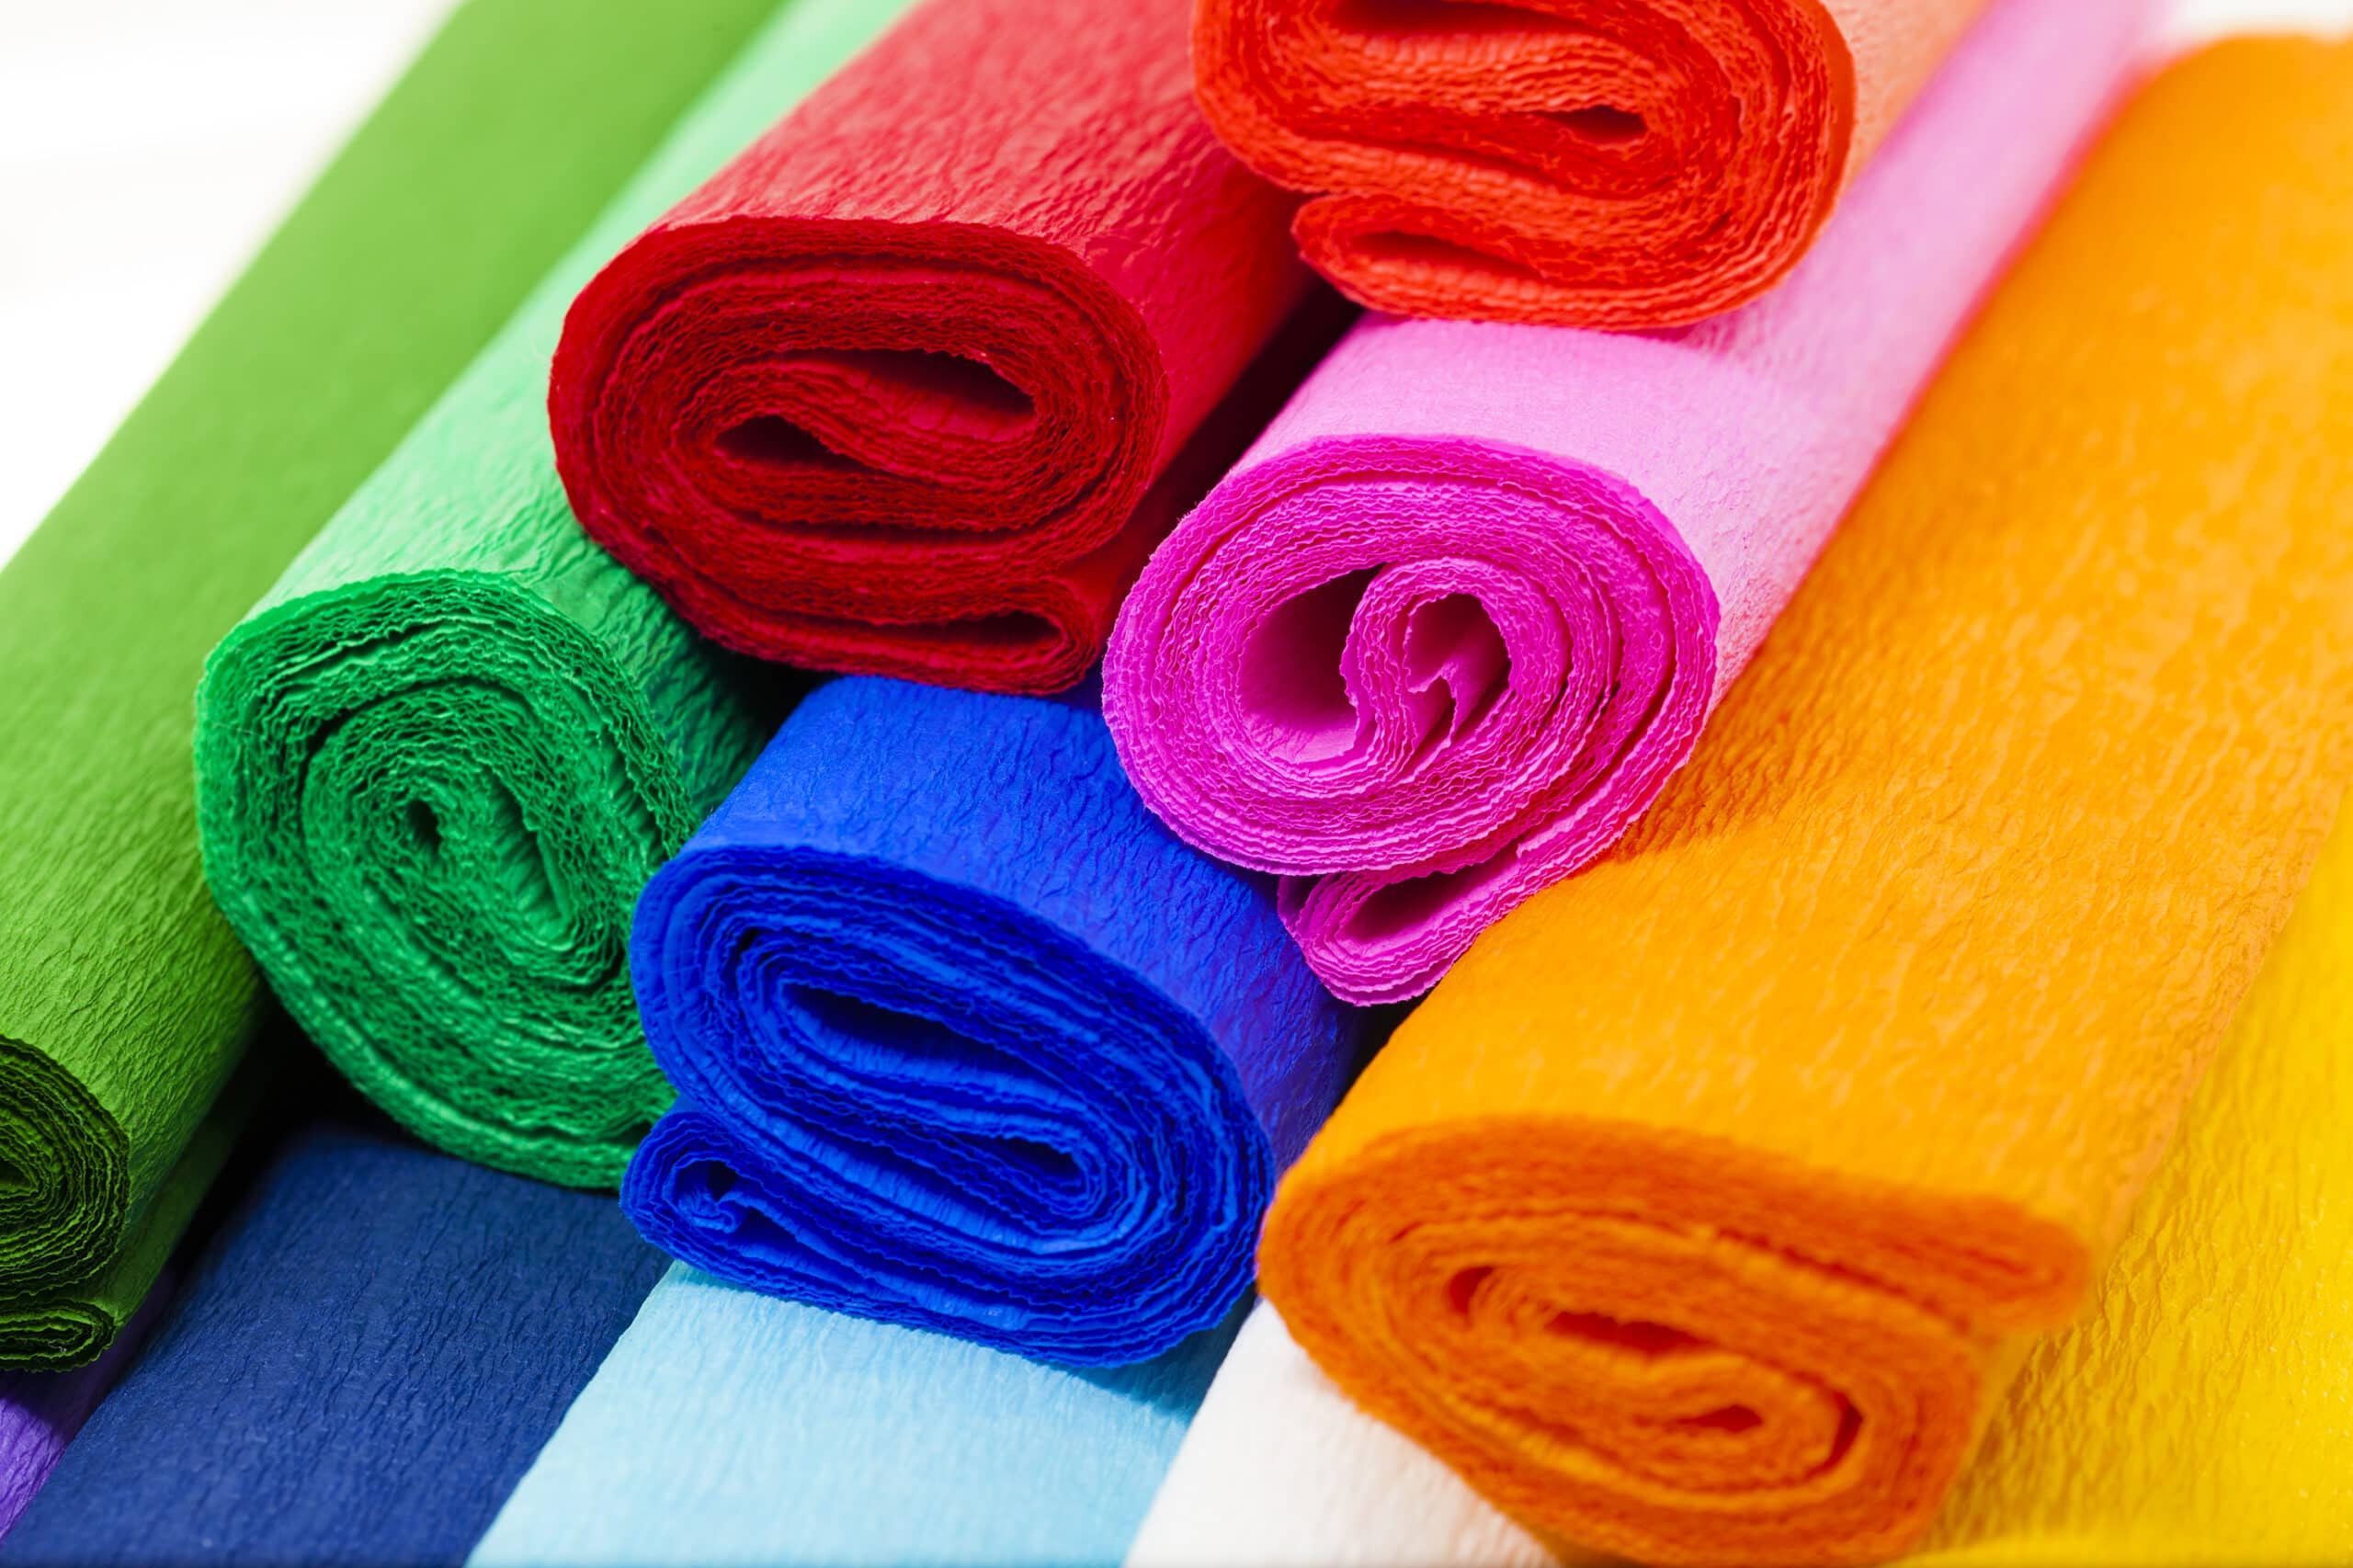 Rolls of crepe paper for making crepe paper flowers. You can make crepe paper flowers using red, orange, pink, green, and blue crepe paper in any colorful shade.